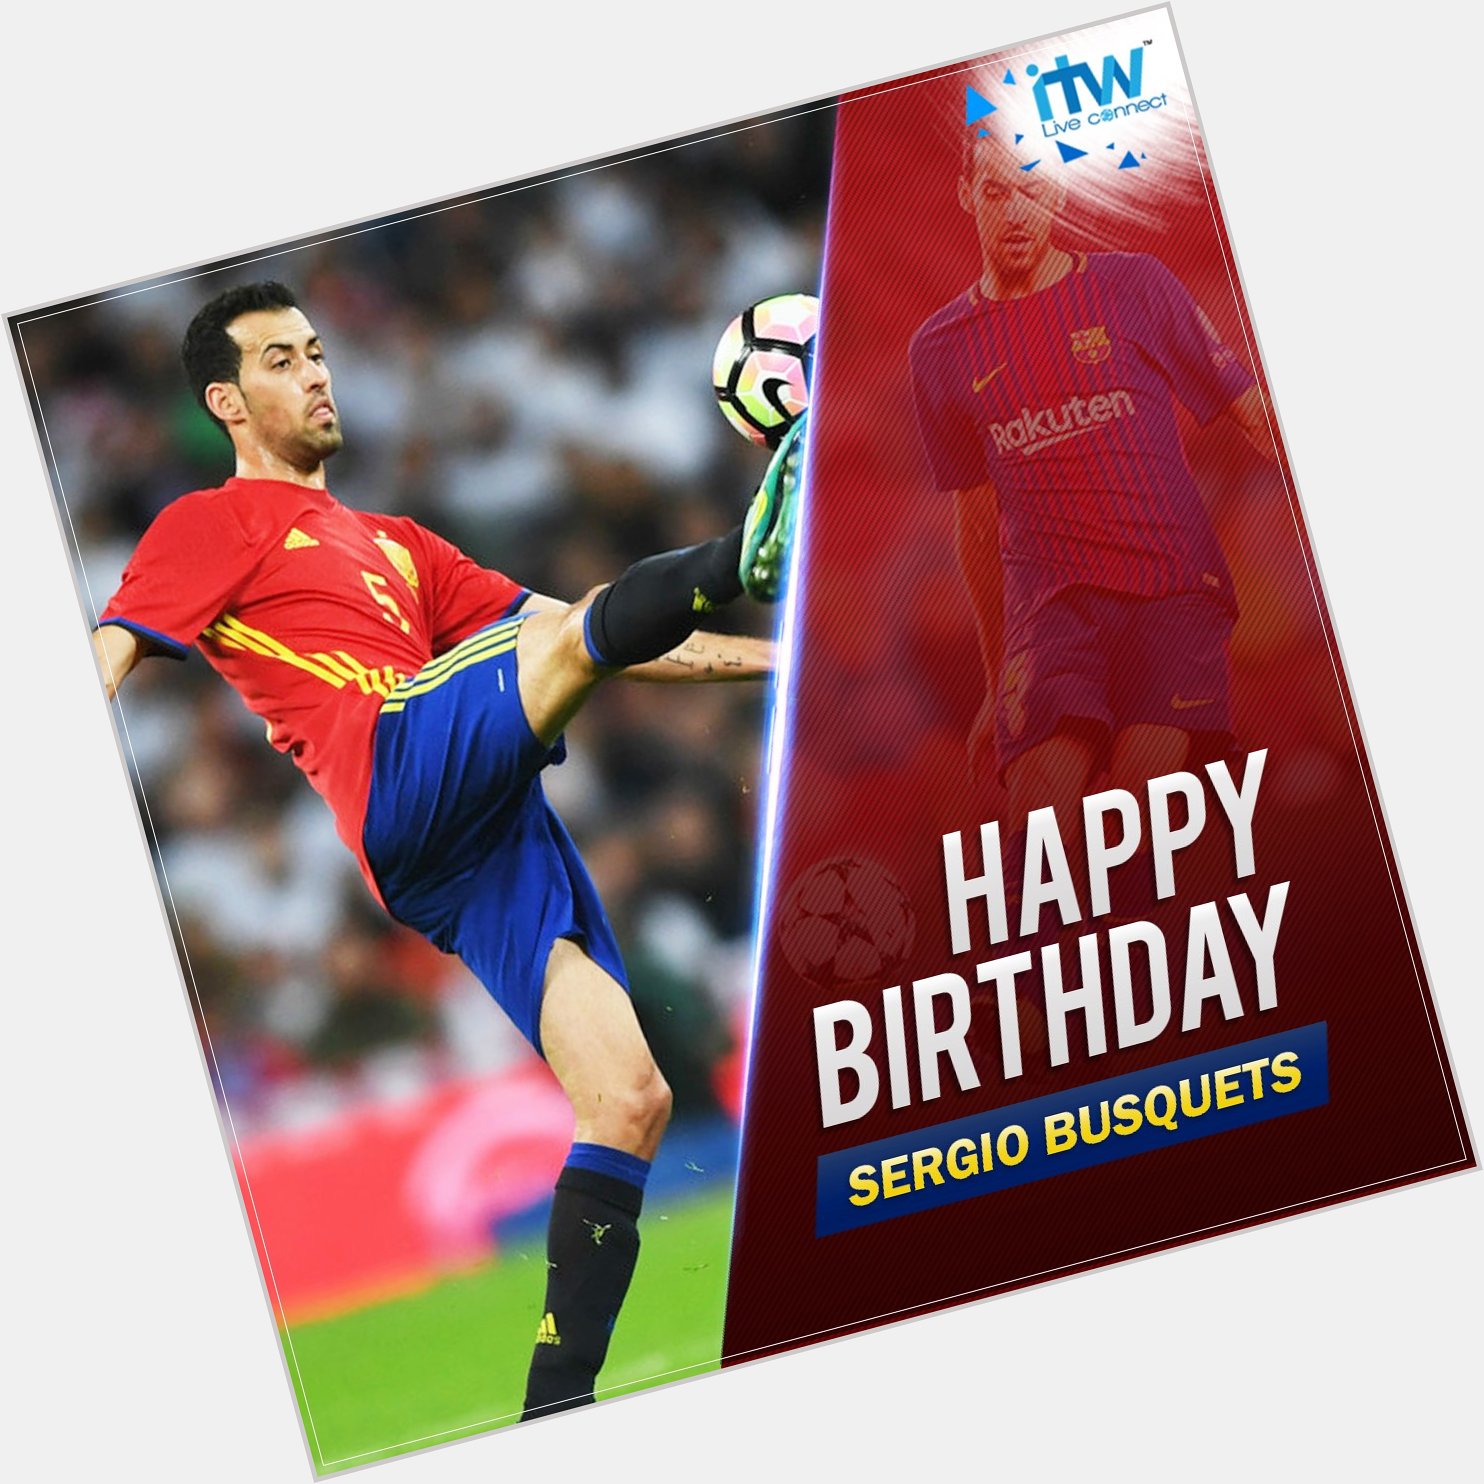 Wishing and midfield maestro Sergio Busquets a very Happy Birthday as he turns 30 today. 